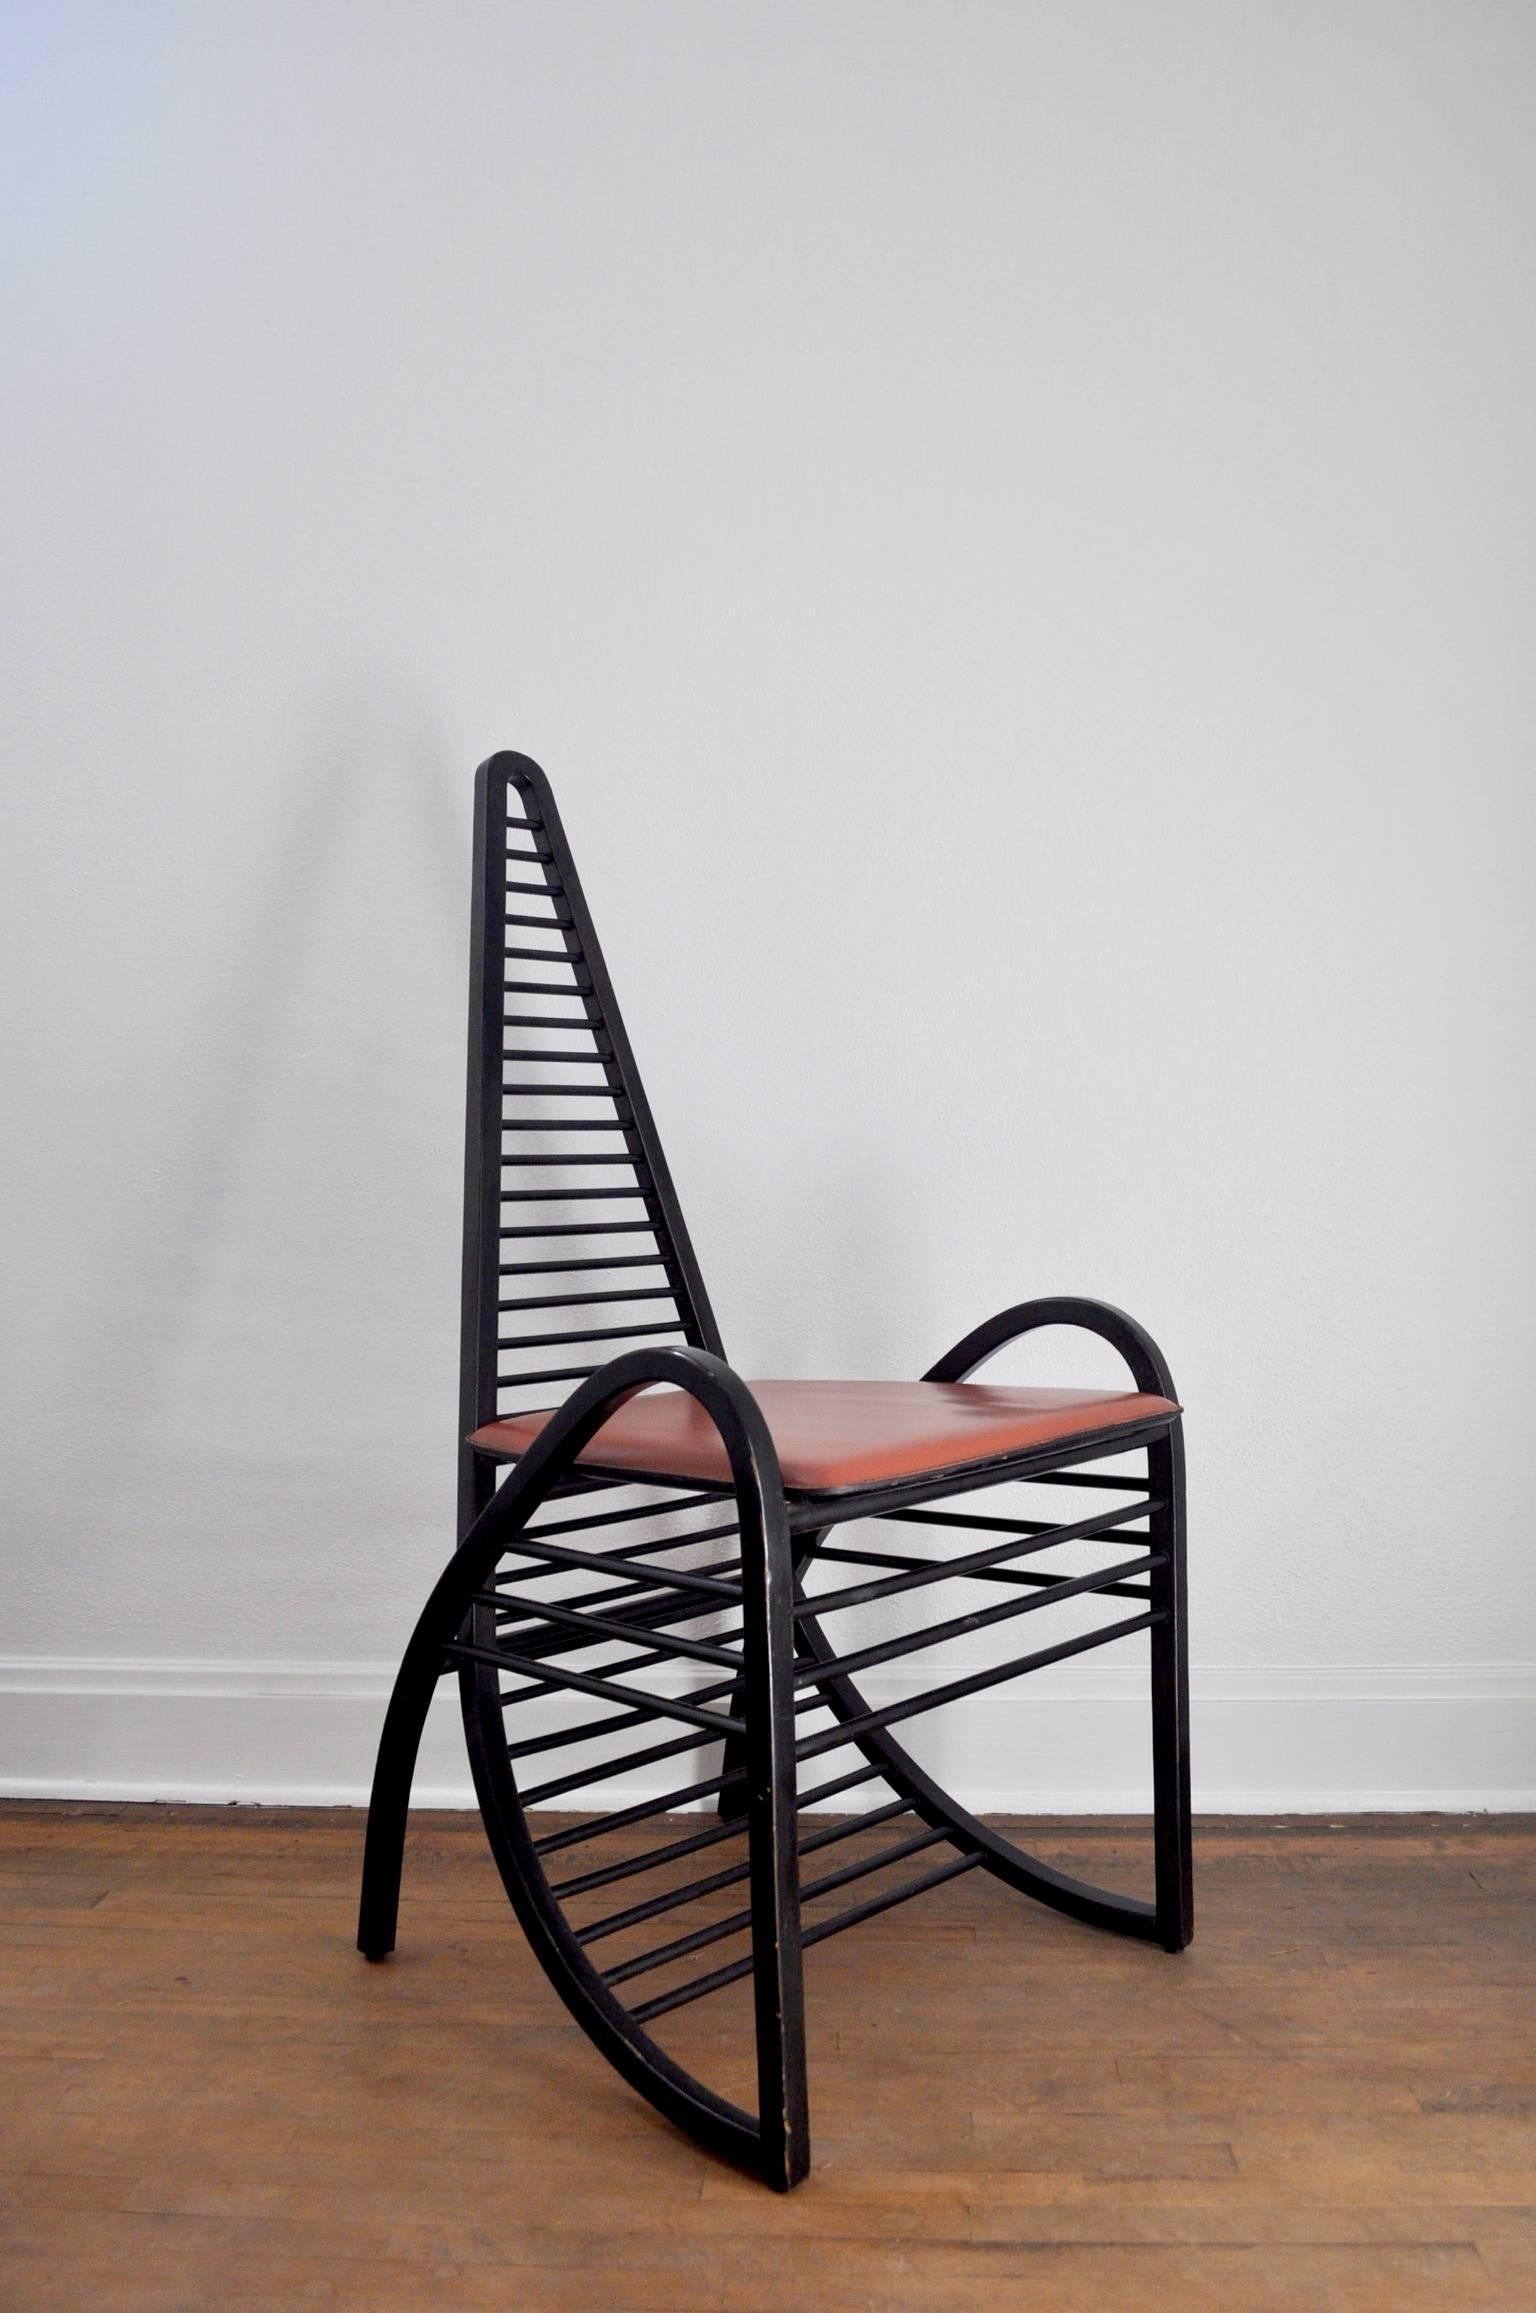 Dynamic 1980s Italian postmodern chair with a continuous gesture in form articulated in painted black wood with a rust-colored leather seat.
  